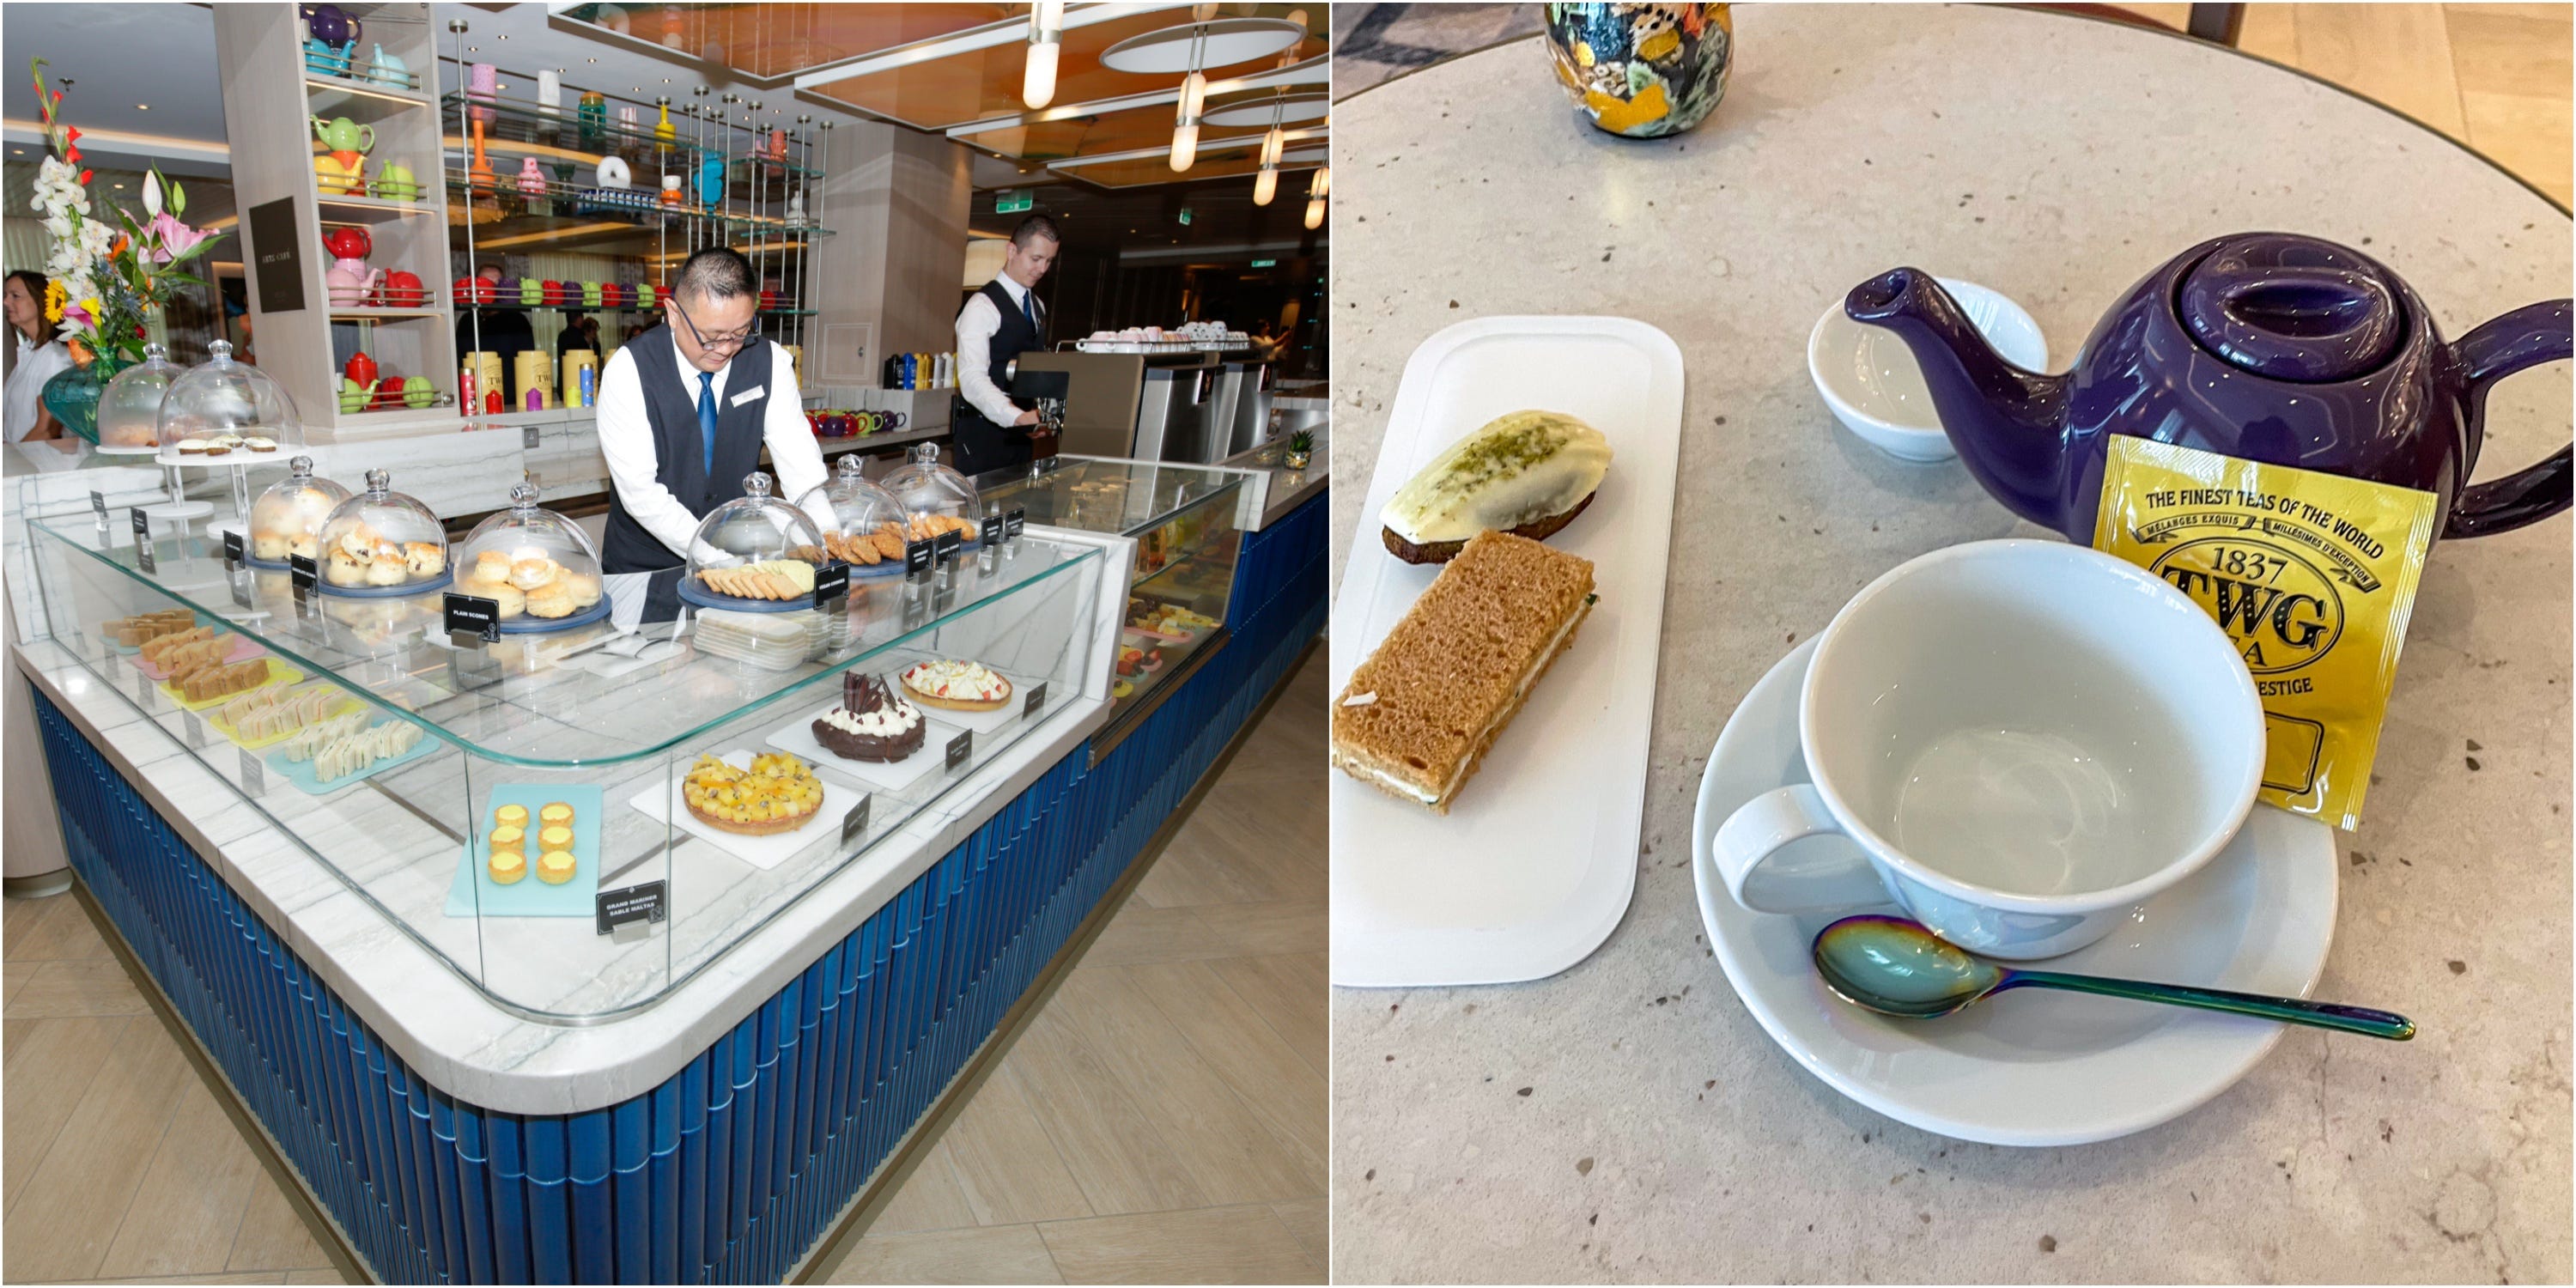 <p>Many <a href="https://www.businessinsider.com/royal-caribbean-icon-of-the-seas-cruise-ship-review-photos-2024-2">popular cruise ships</a> have an onboard Starbucks. Silver Ray goes one step further with a café comparable to your overpriced neighborhood coffee shop (and this one won't make you pay extra for oat milk).</p><p>At the centrally located Arts Cafe, guests can order latte art-topped espresso drinks and uncommon tea varieties — all served with Mepra spoons that <a href="https://www.theluxuryartmepra.com/linea-rainbow.html">cost</a> $40 each.</p><p>If you're a fan of cucumber sandwiches and cakes, the Art Cafe is also a great place to grab a mid-day snack or host an impromptu afternoon tea.</p>